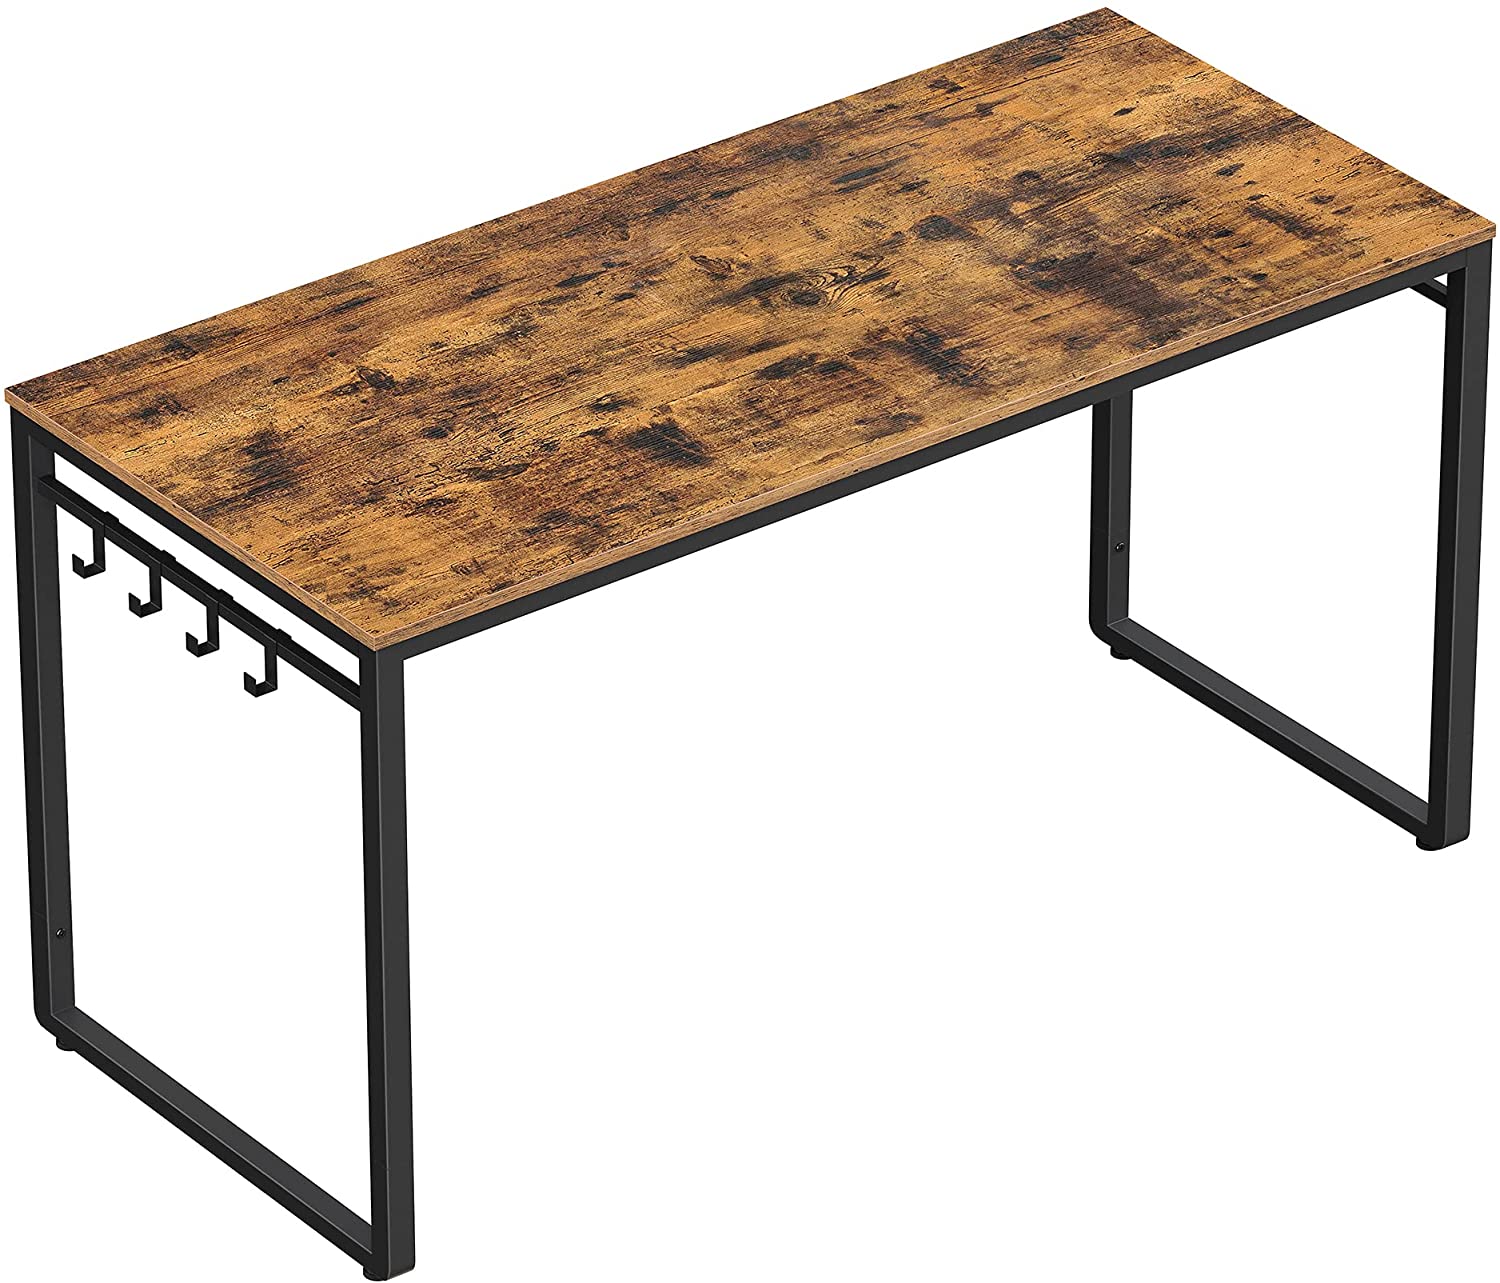 Writing Desk, Computer Desk, Office Desk with 8 Hooks, 140 x 60 x 75 cm, for Study and Home Office, Easy Assembly, metal, Industrial Design, Rustic Brown and Black LWD59X RAW58.dk 